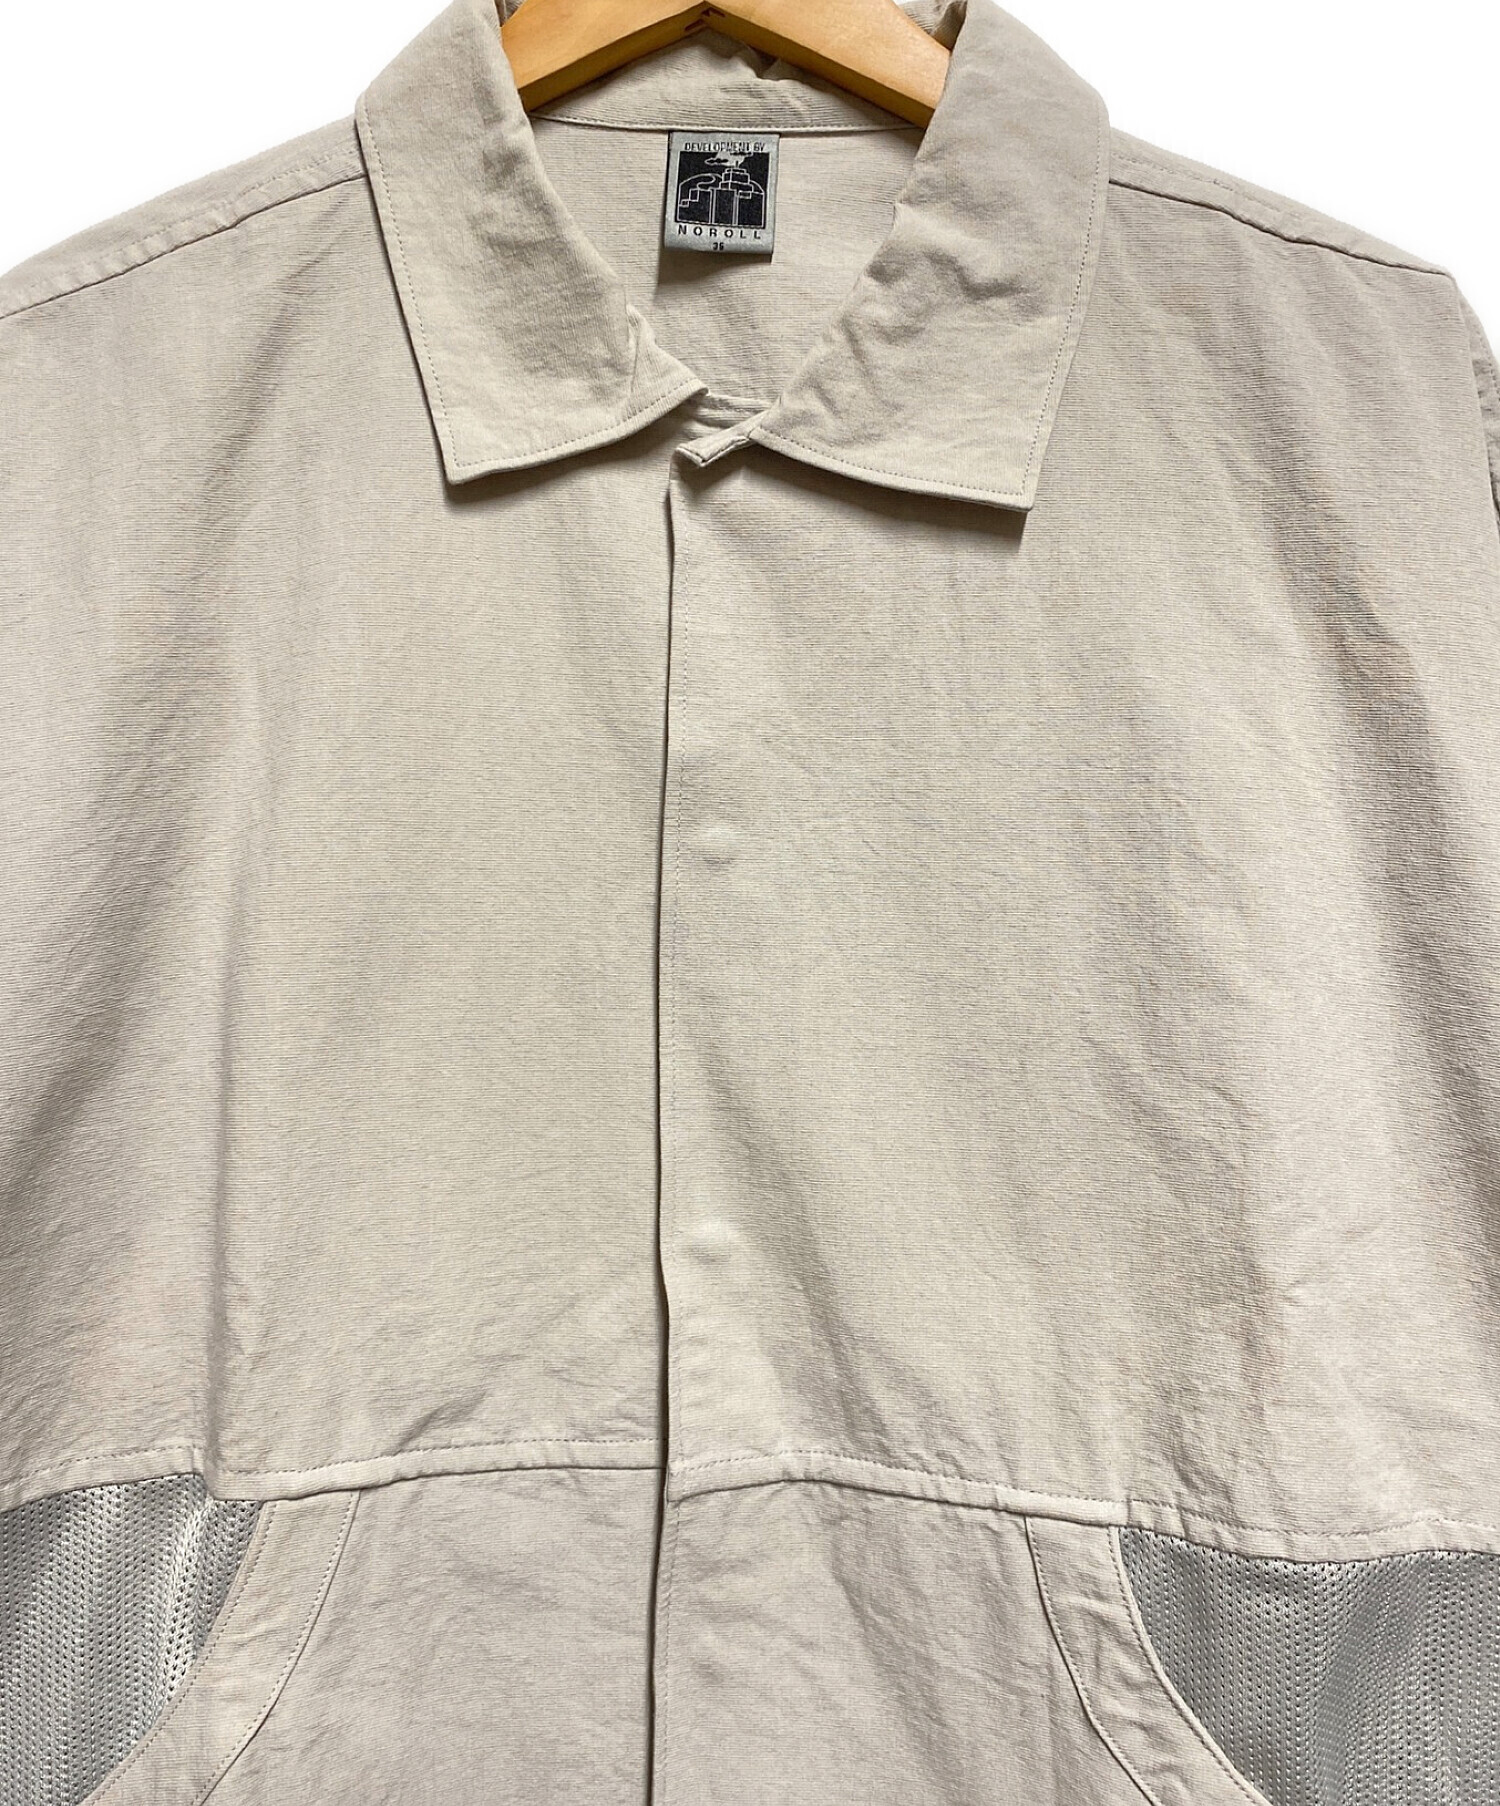 NOROLL - THROUGH SOLID SHIRTS - Beige